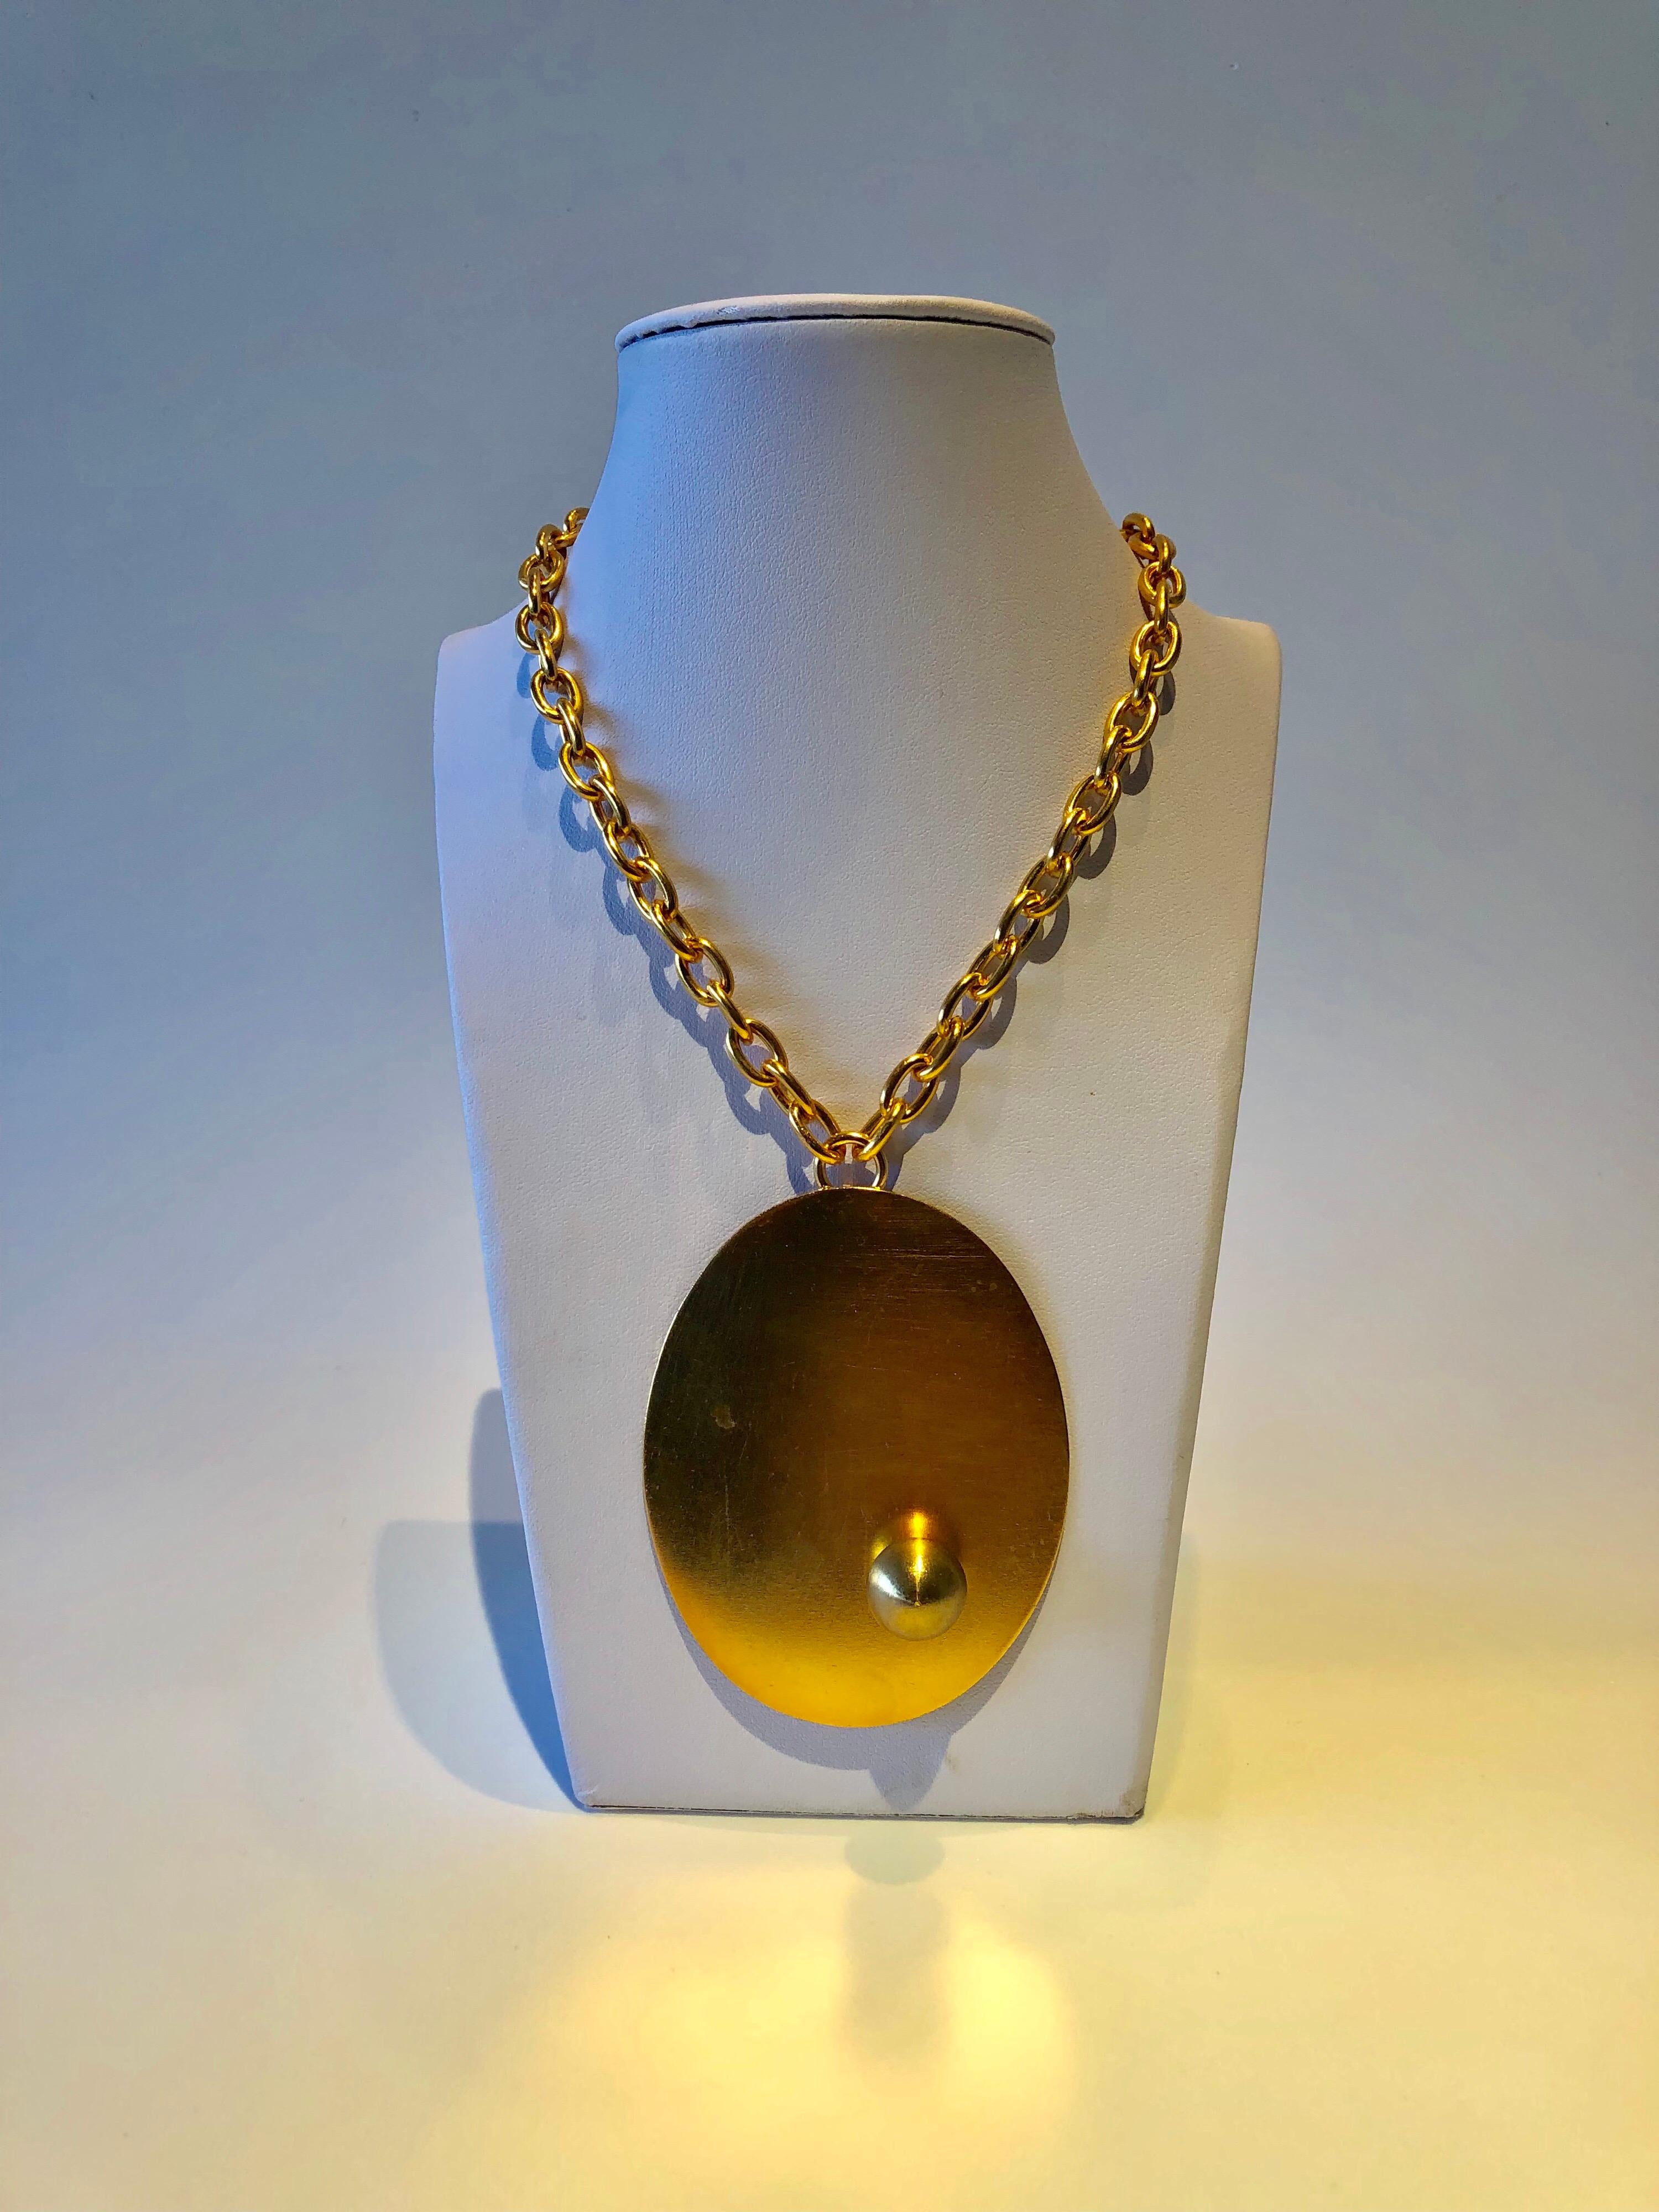 Vintage modernist pendant statement necklace comprised of mat gold-tone metal - the necklace features a minimalist modern design throughout, accented by a large oval pendant. Made in France in the 1970s by Premiere Etage - an accessories atelier